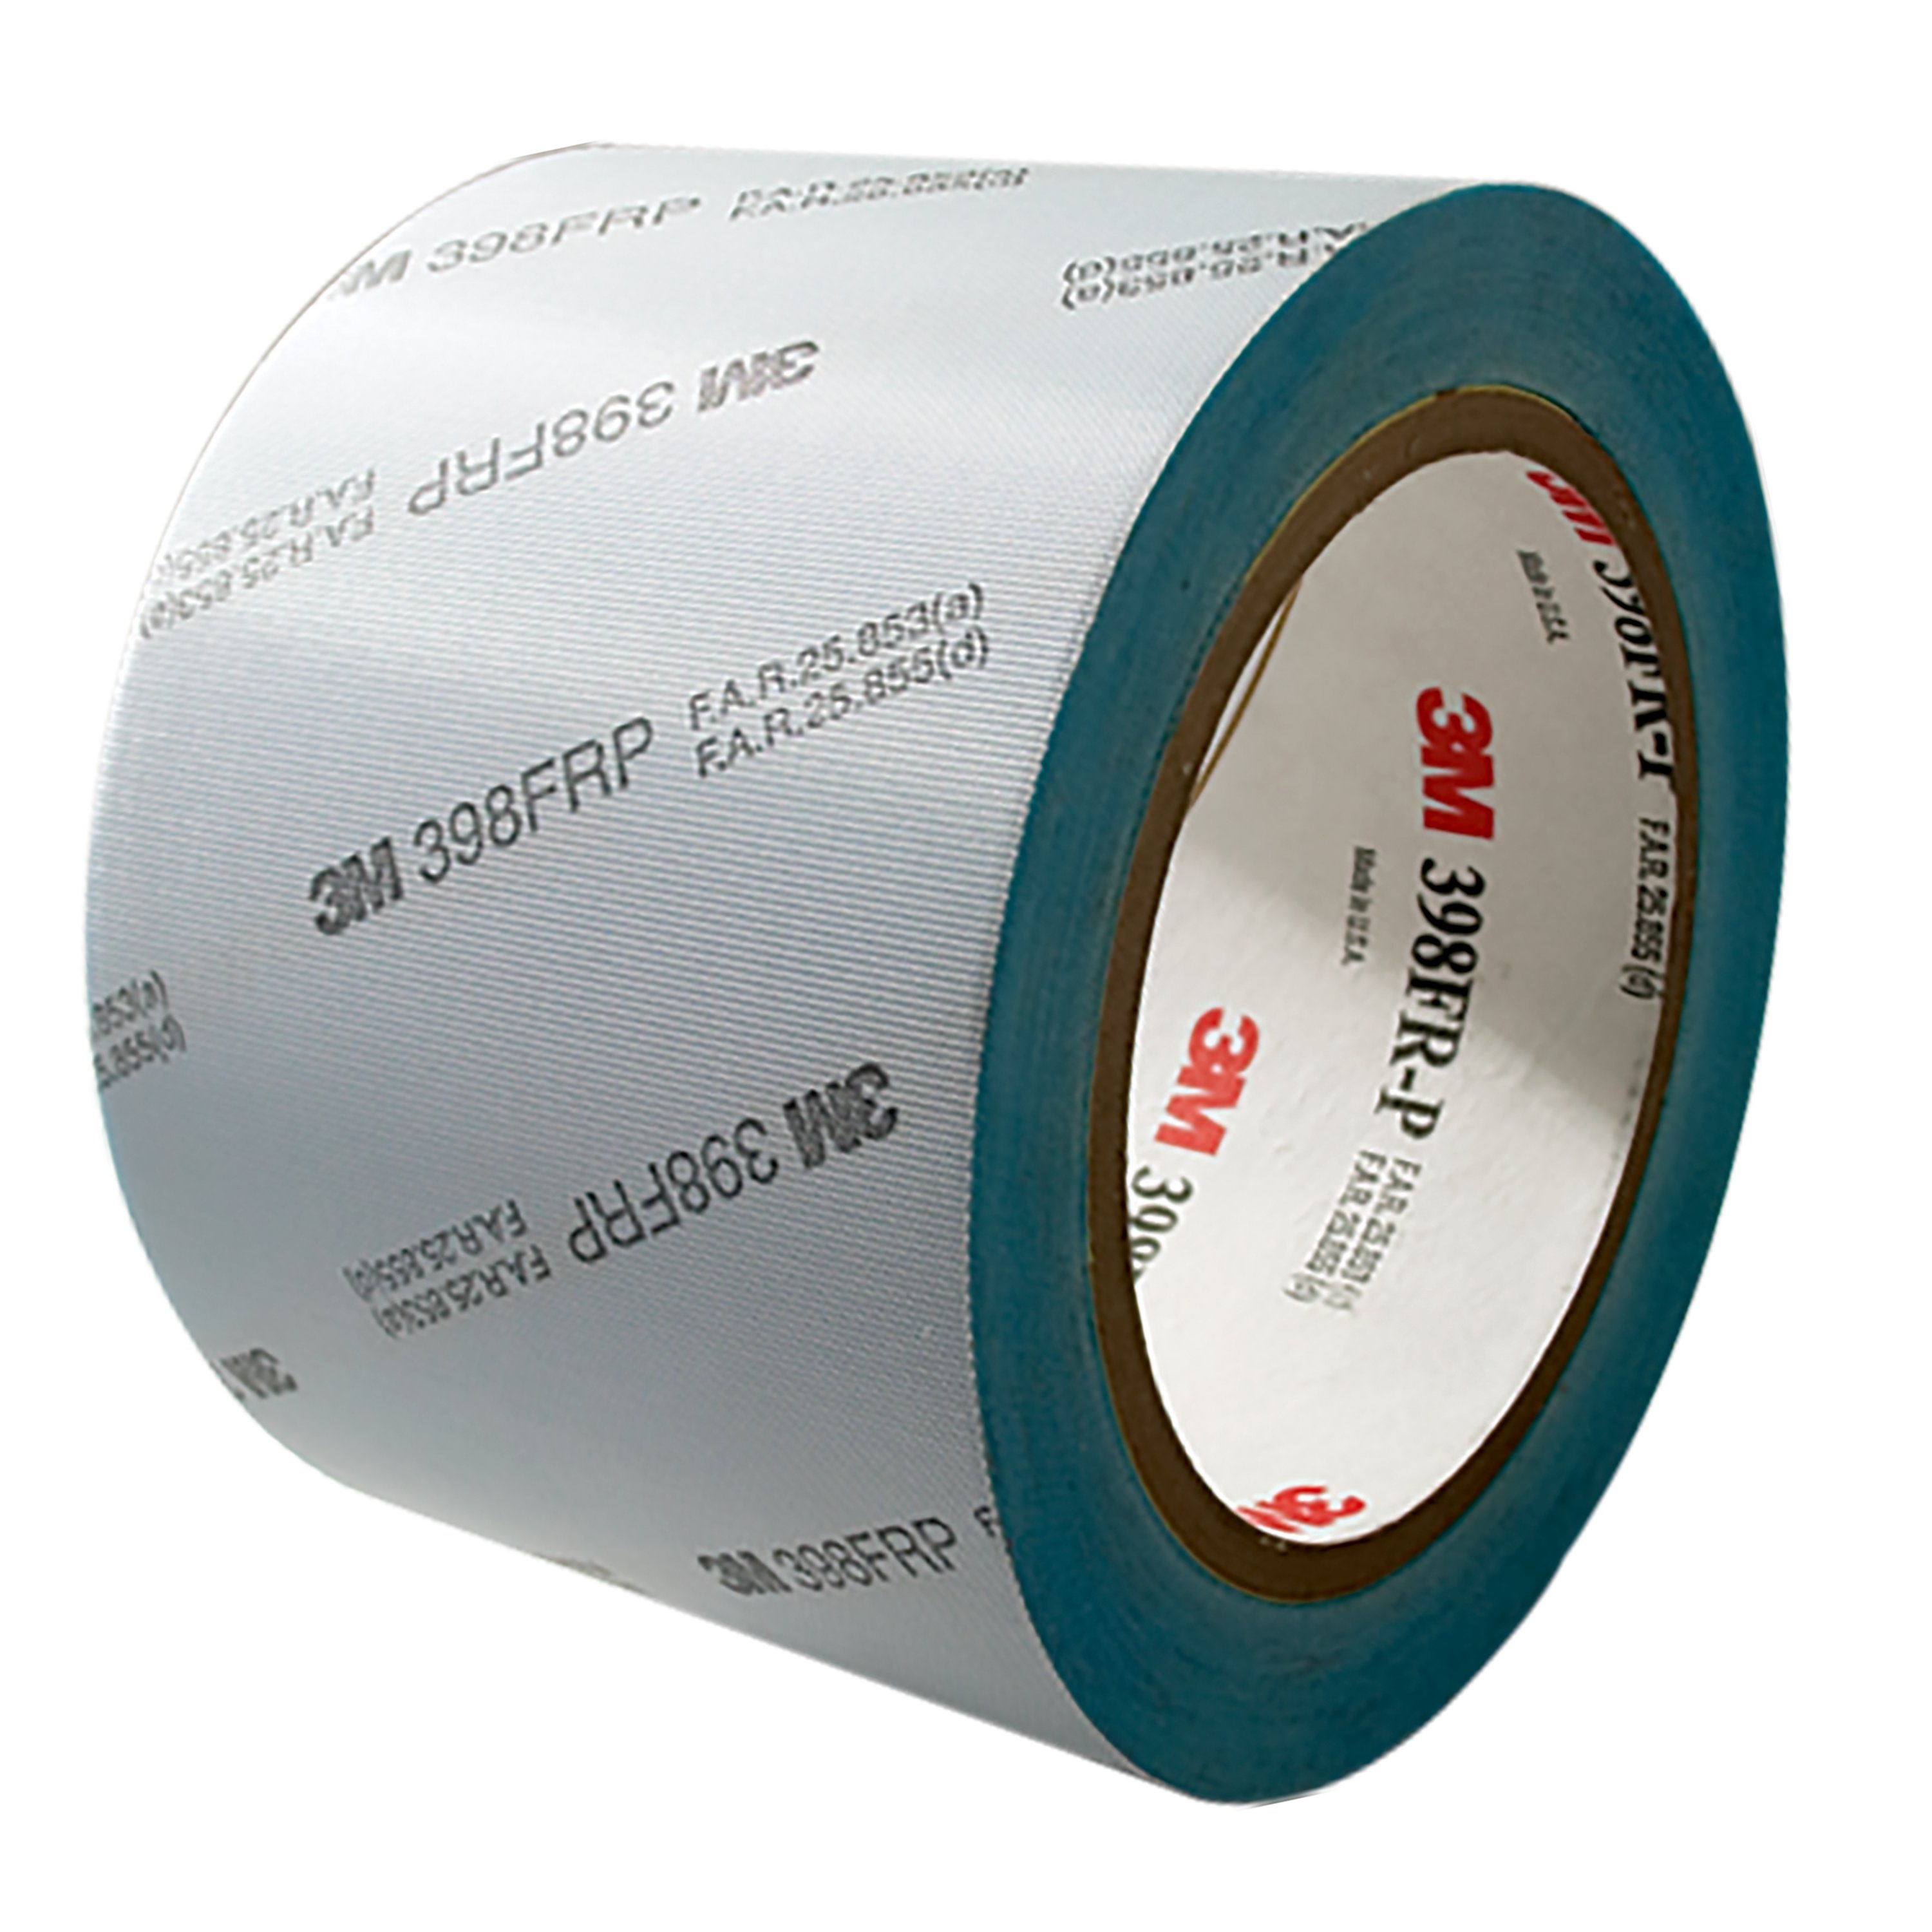 3M™ Glass Cloth Tape 398FRP  has a printed liner which shows it meets industry FAR specifications.